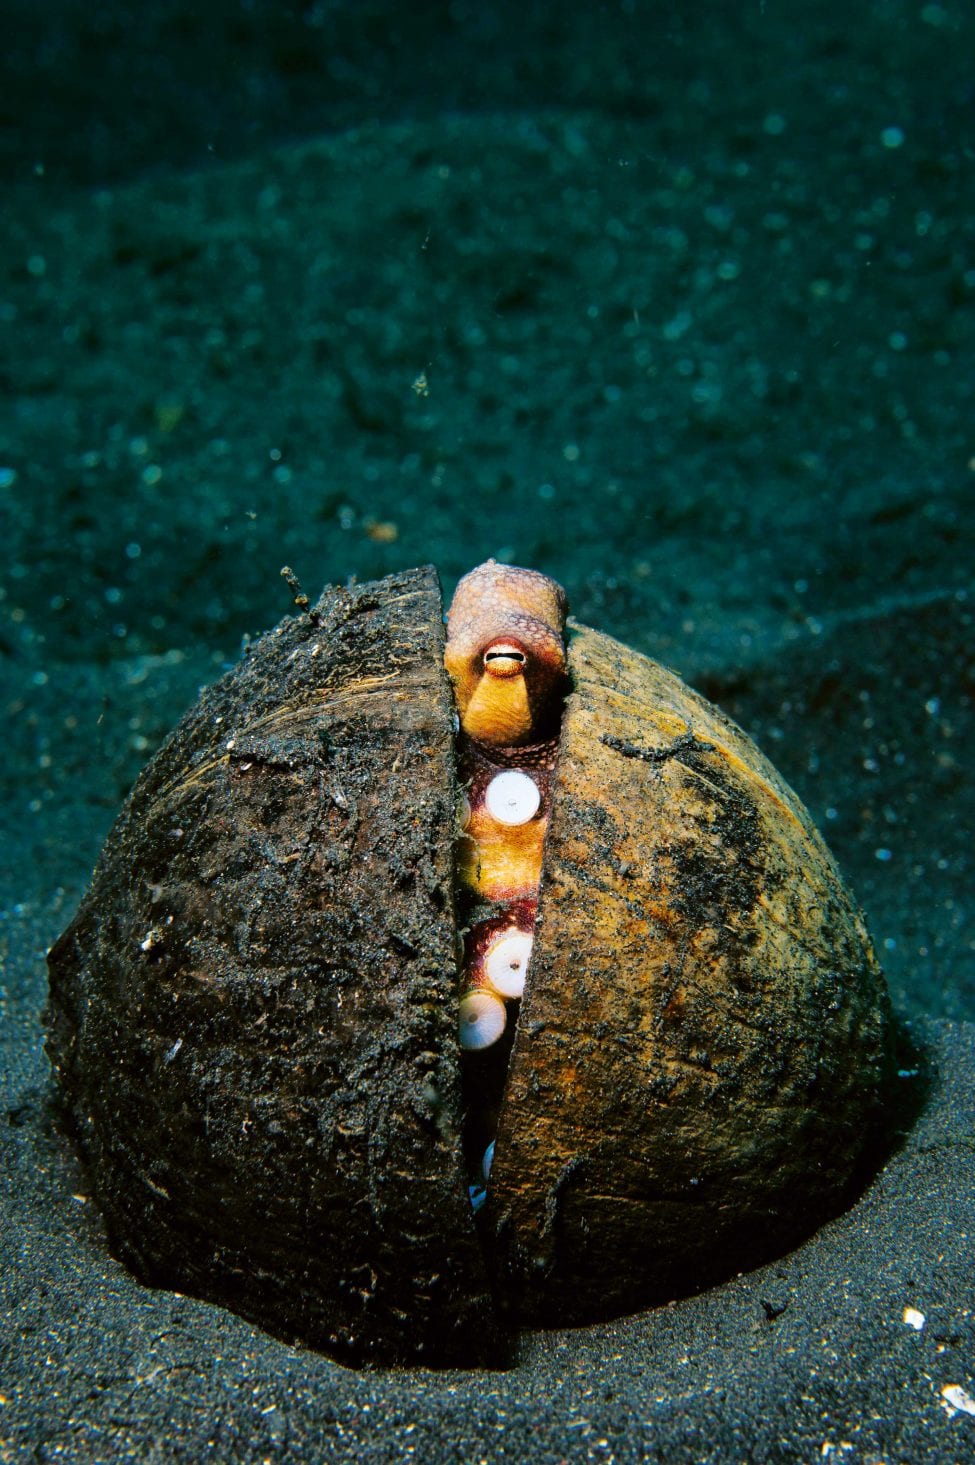 The coconut octopus, found in Lembeh Strait, Sulawesi, secretes itself inside a shell for shelter and as camouflage from predators. <br />
Photo by Stocktrek Images | National Geographic Image Collection